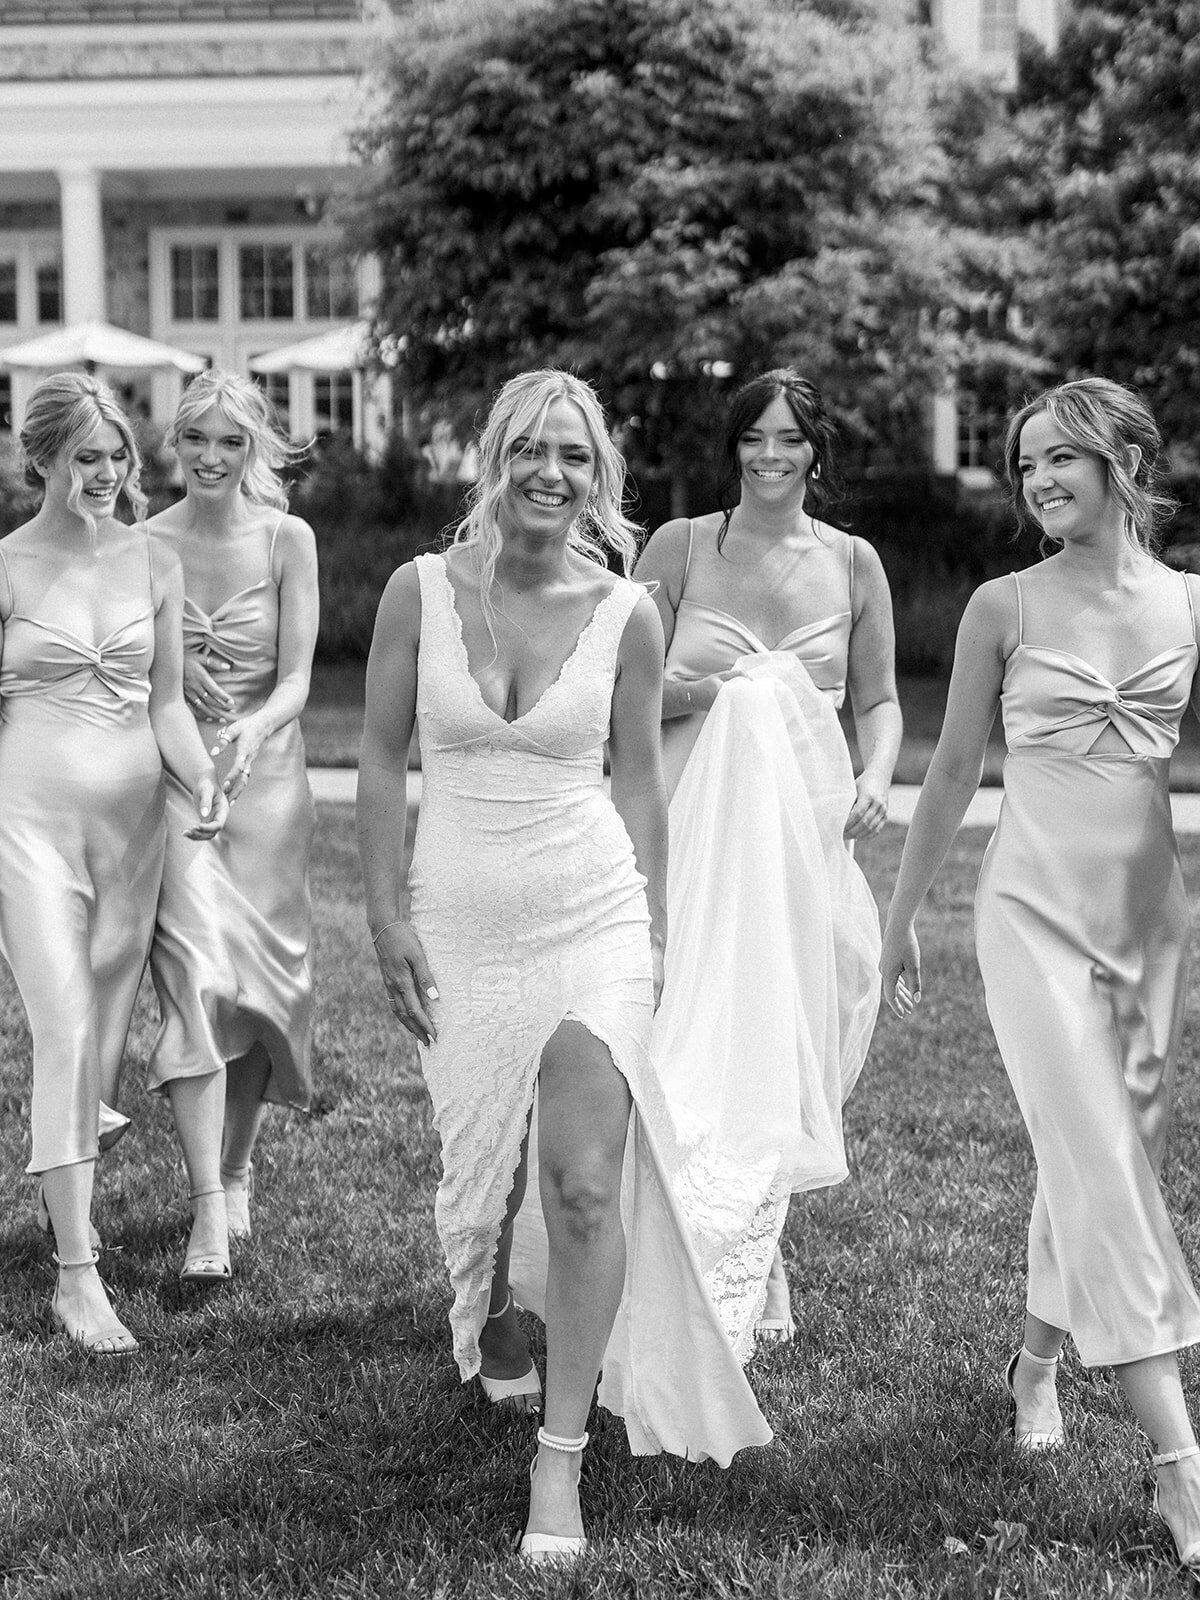 Bride and bridesmaids walk together with joy in this black and white image